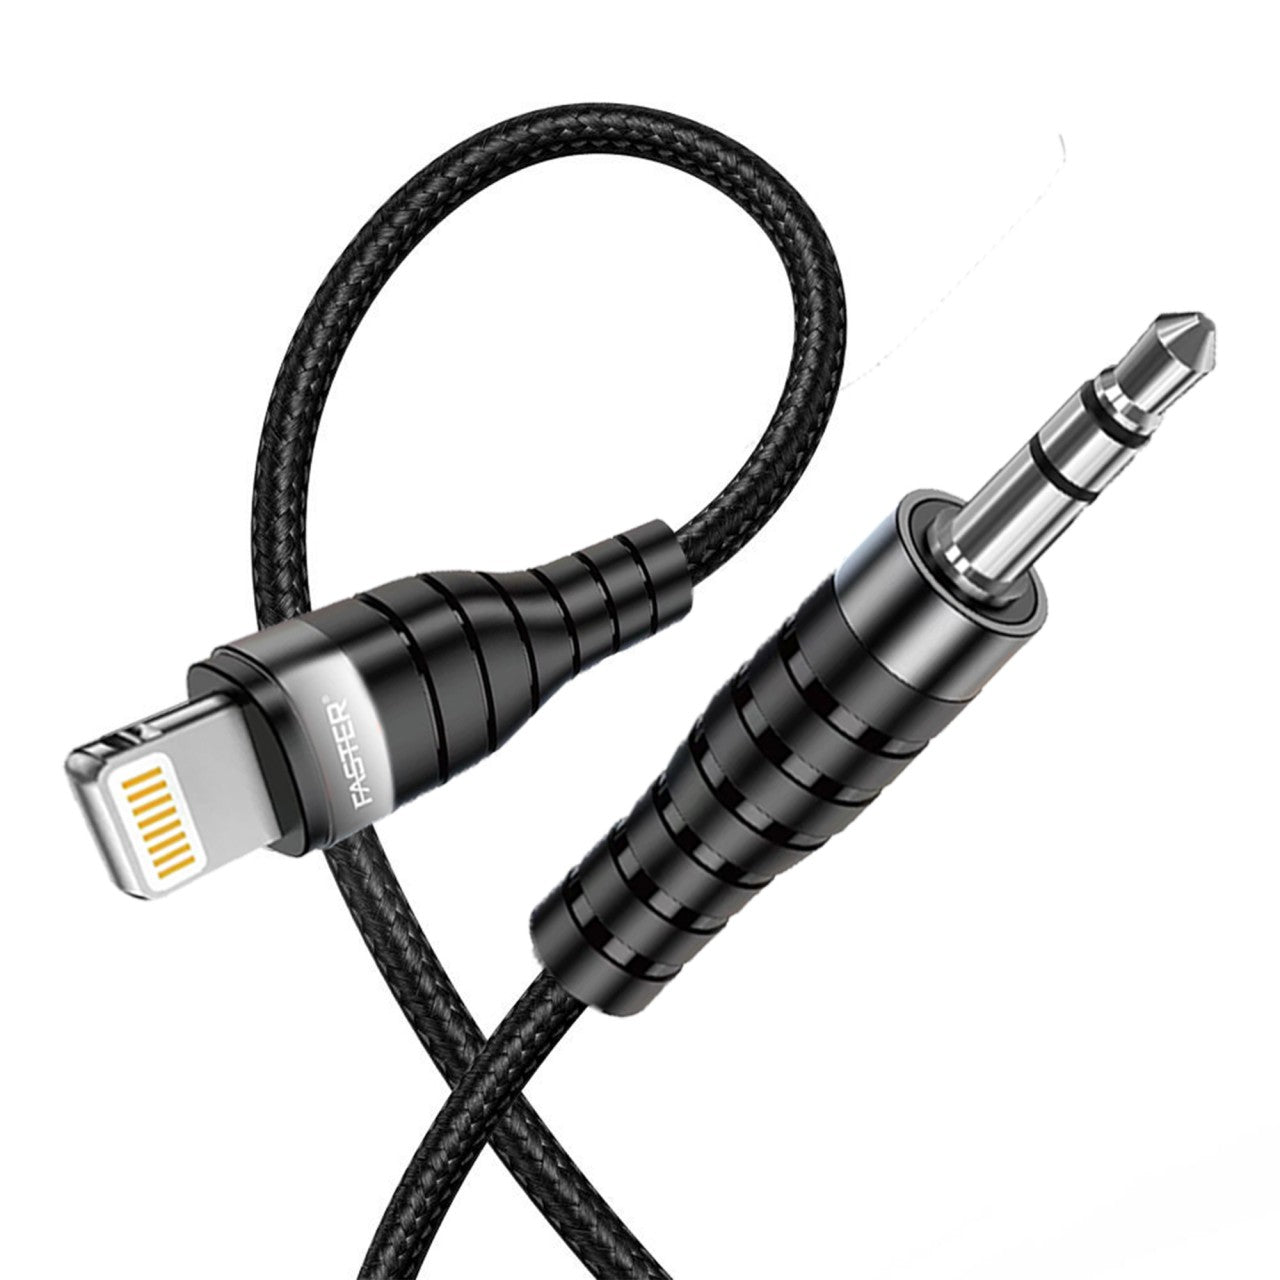 Faster Audio Cable for Lightning to 3.5mm Port Price in Pakistan